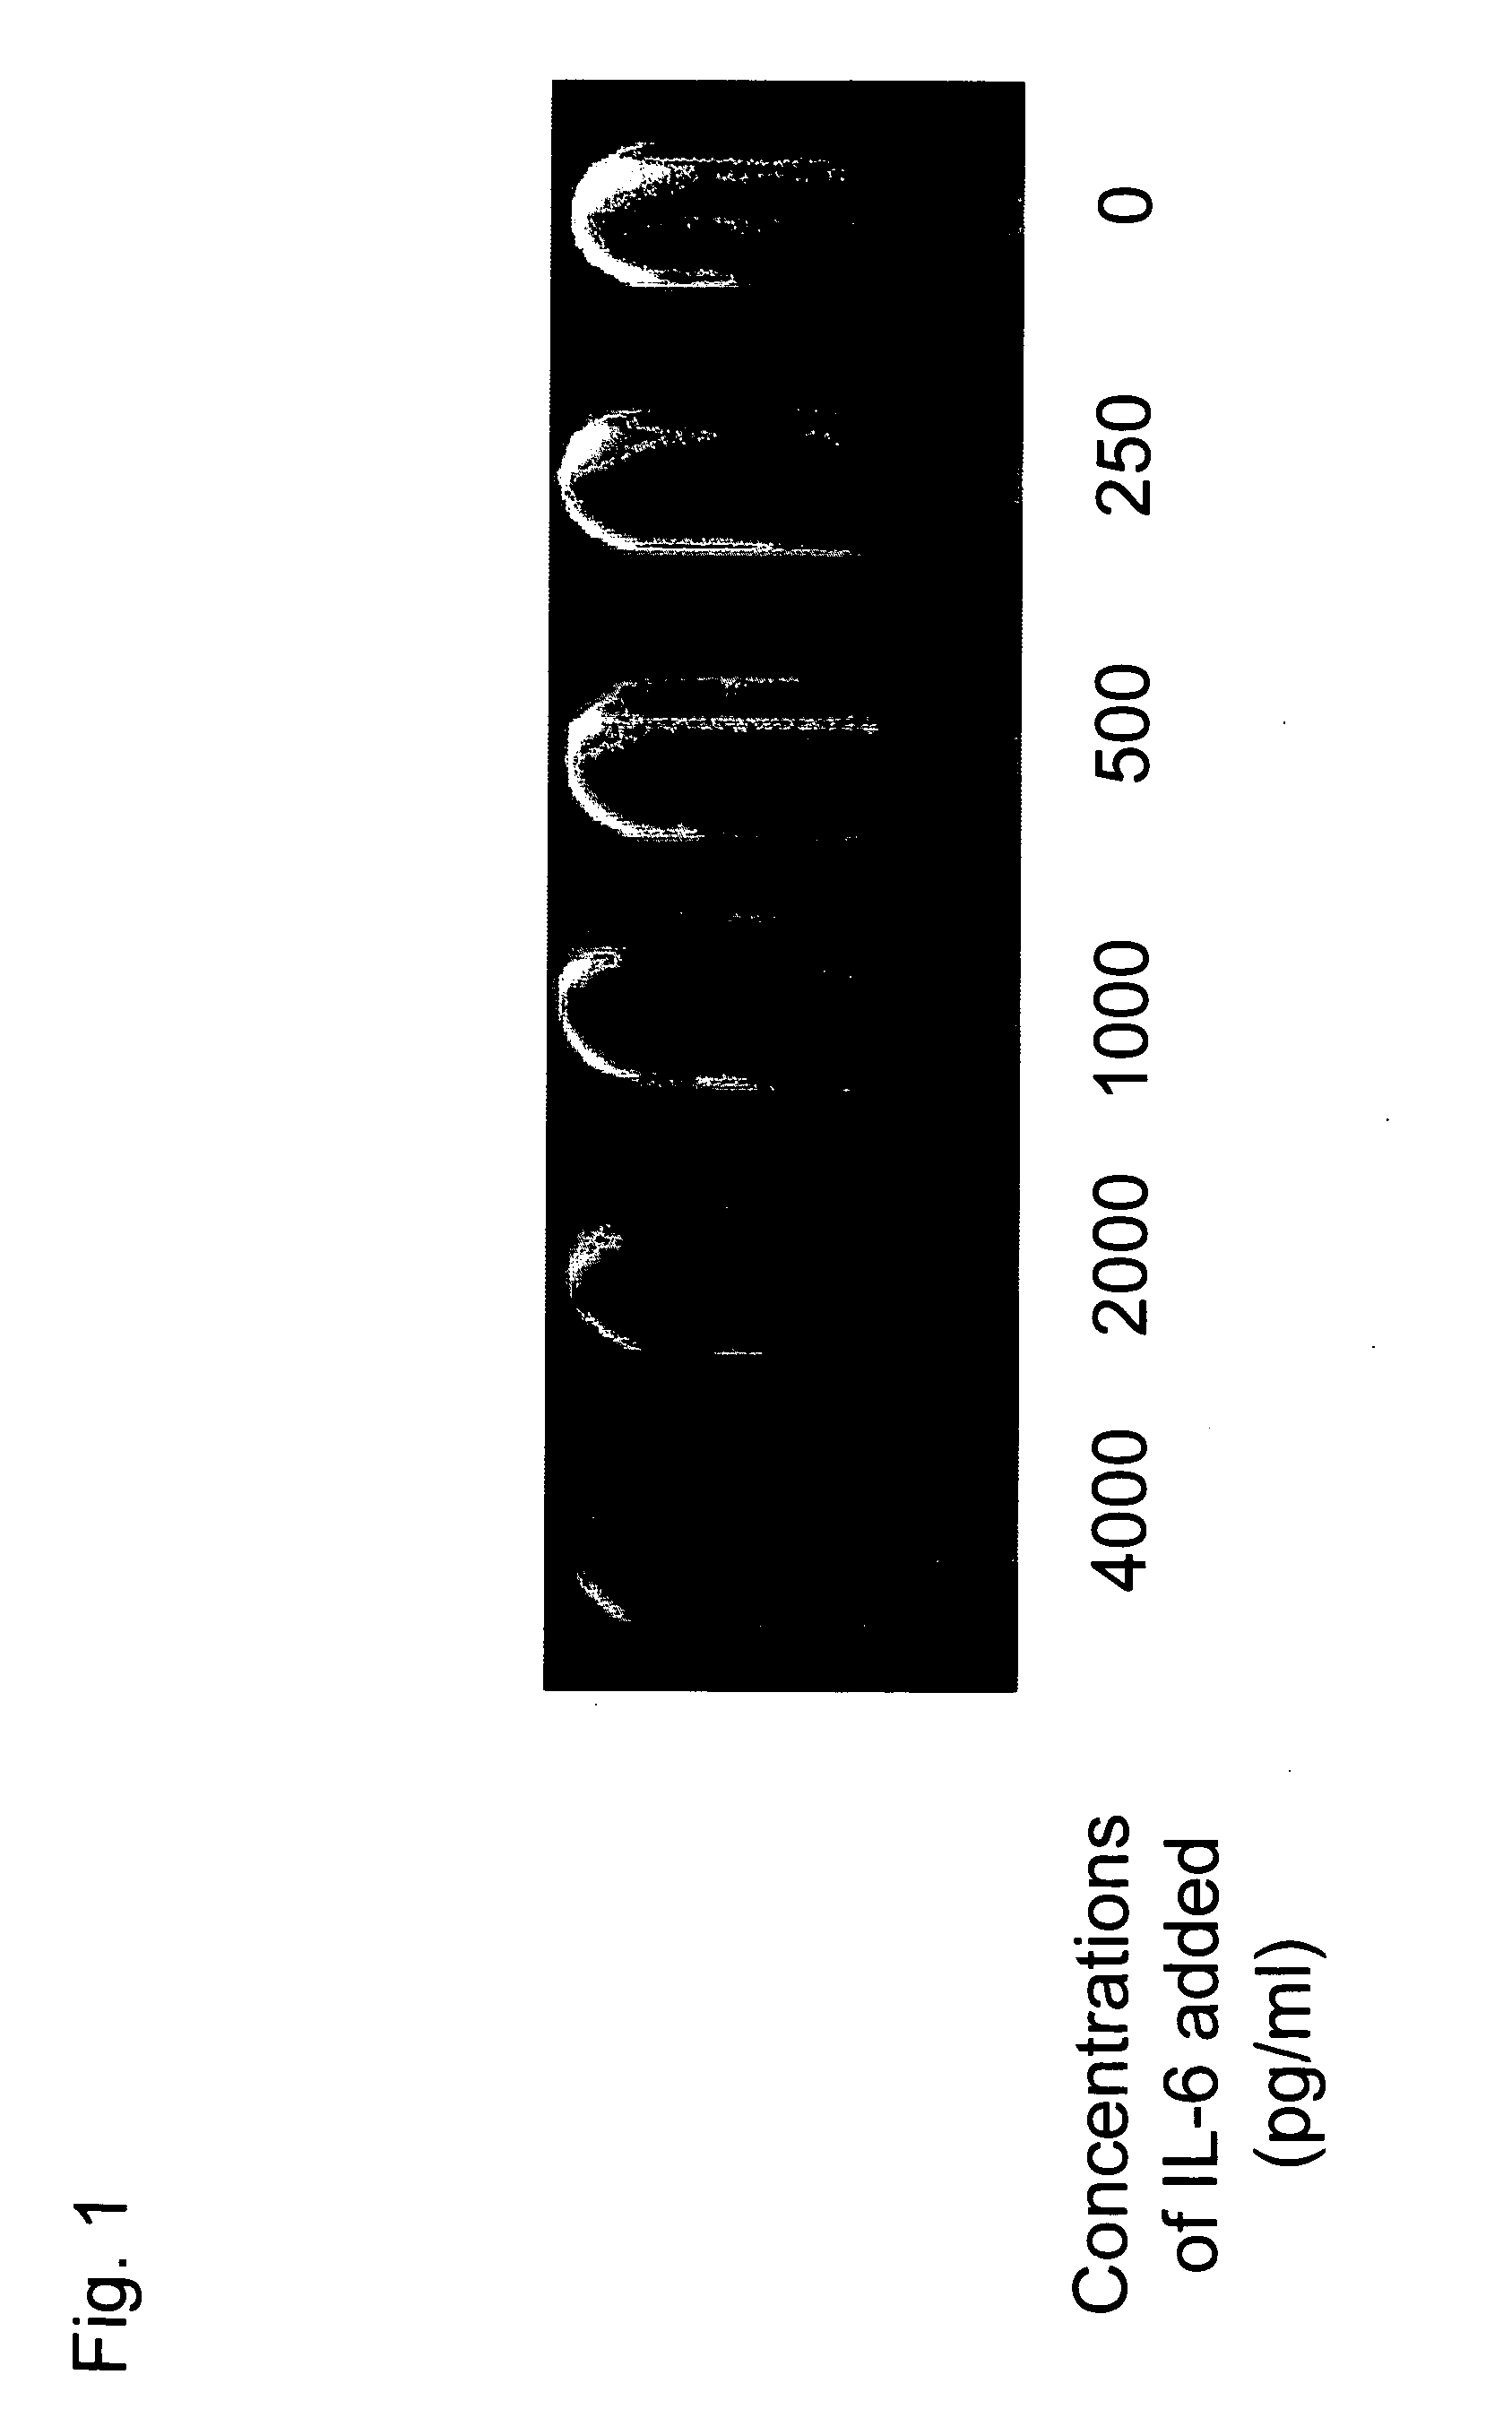 Method for Rapidly and Conveniently Detecting Target Substances and Enzyme Immunological Kit Therefor